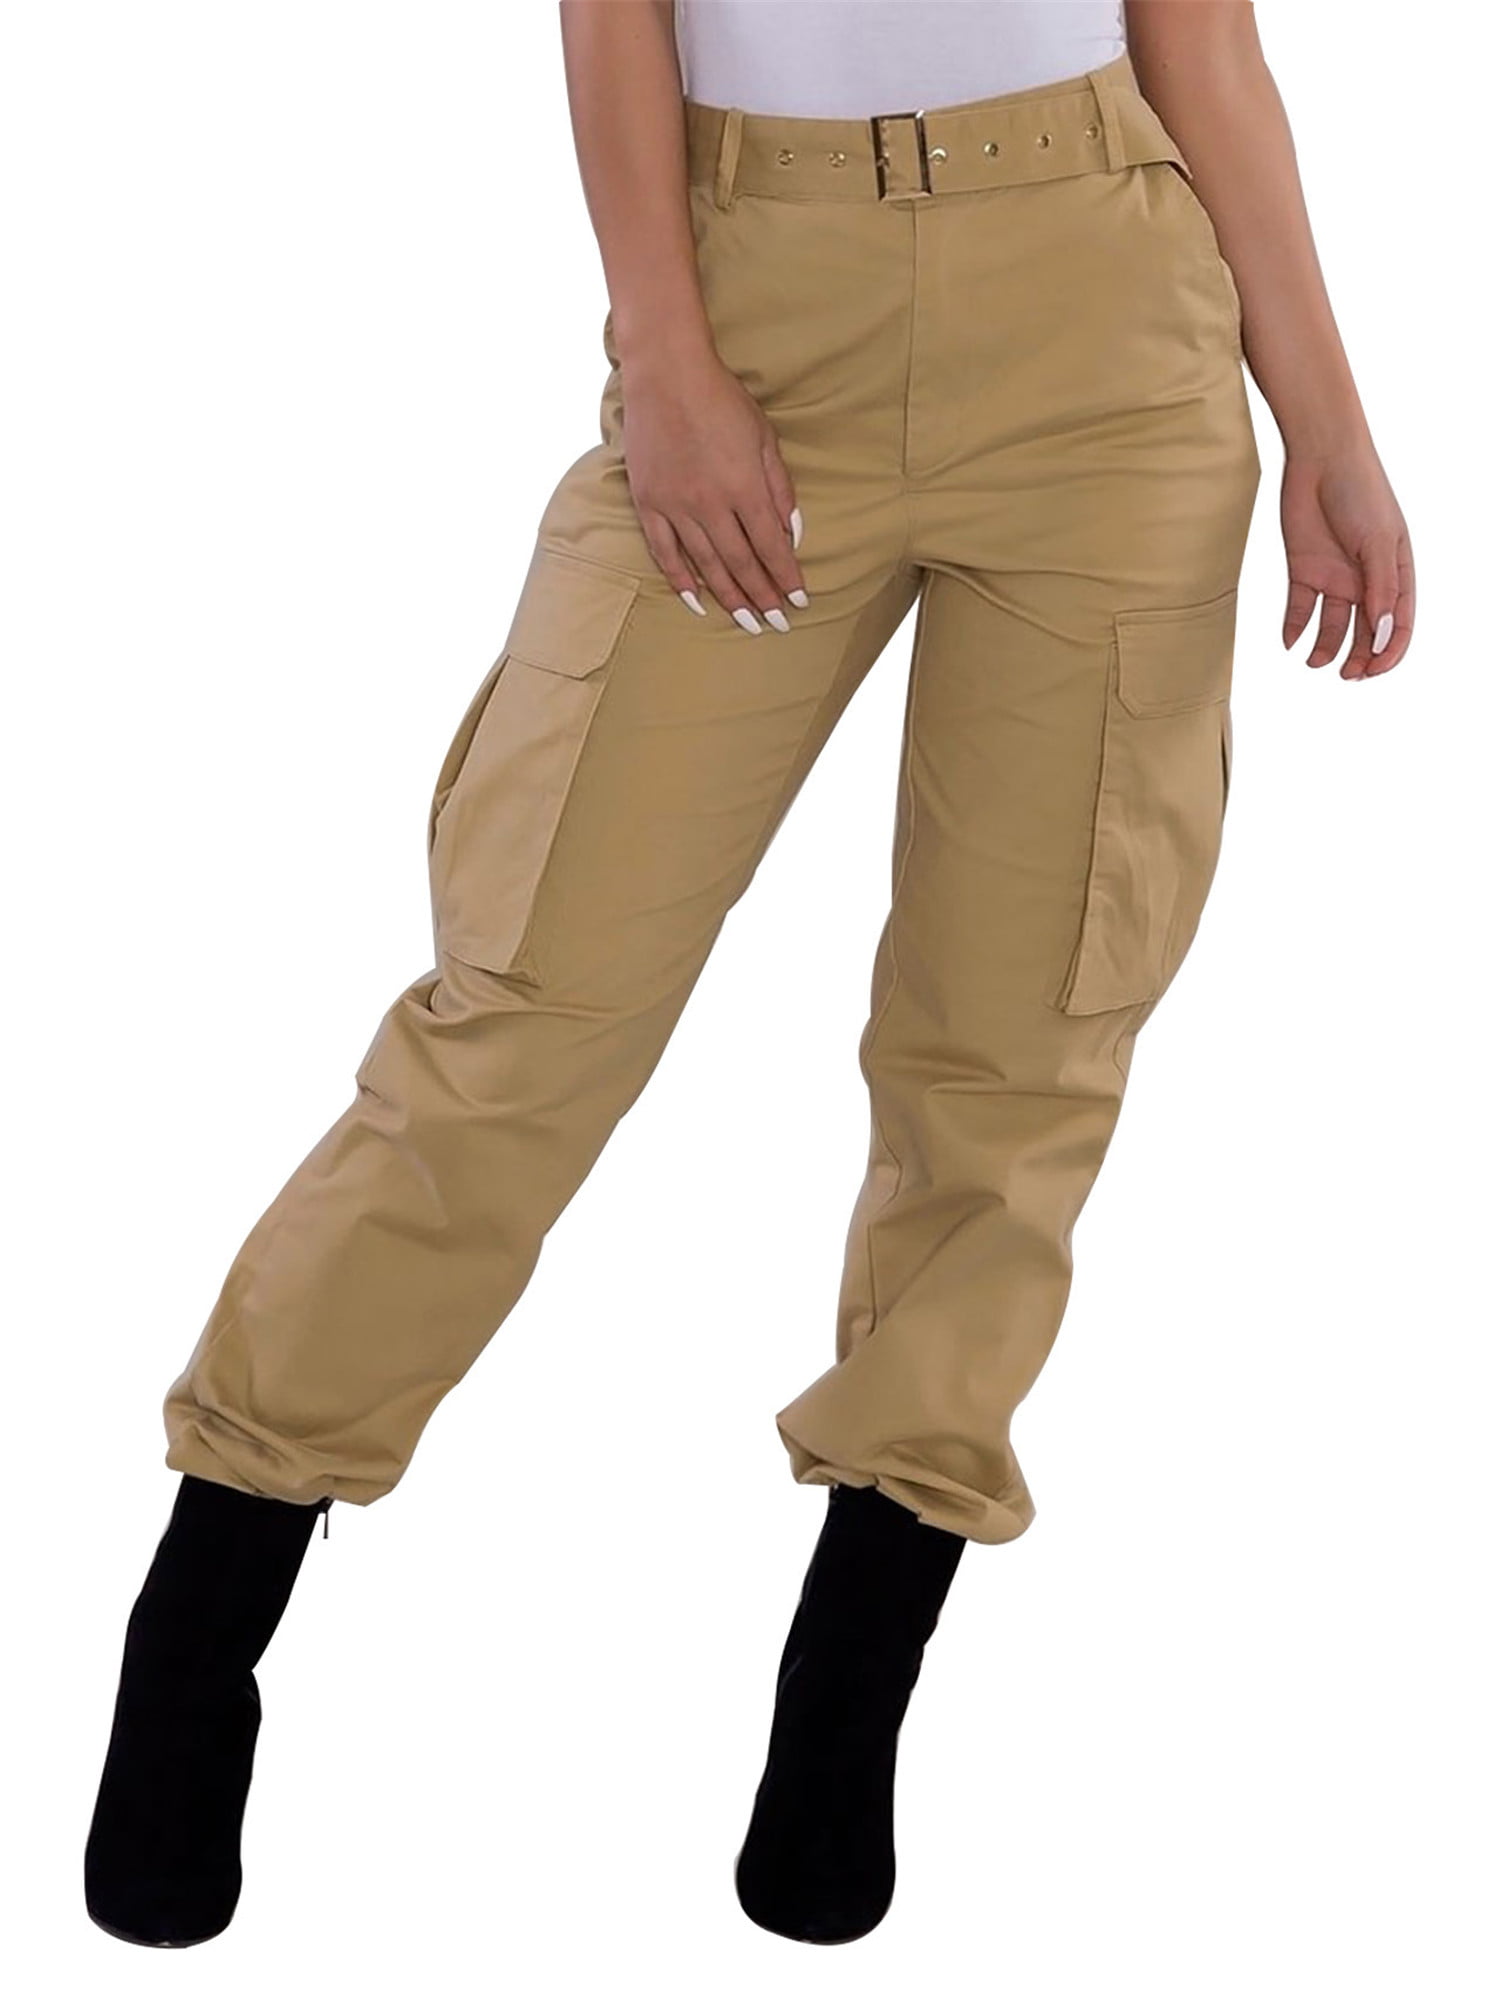 Raroauf Womens Cotton Casual Military Army Cargo Combat Work Pants with 8 Pocket 